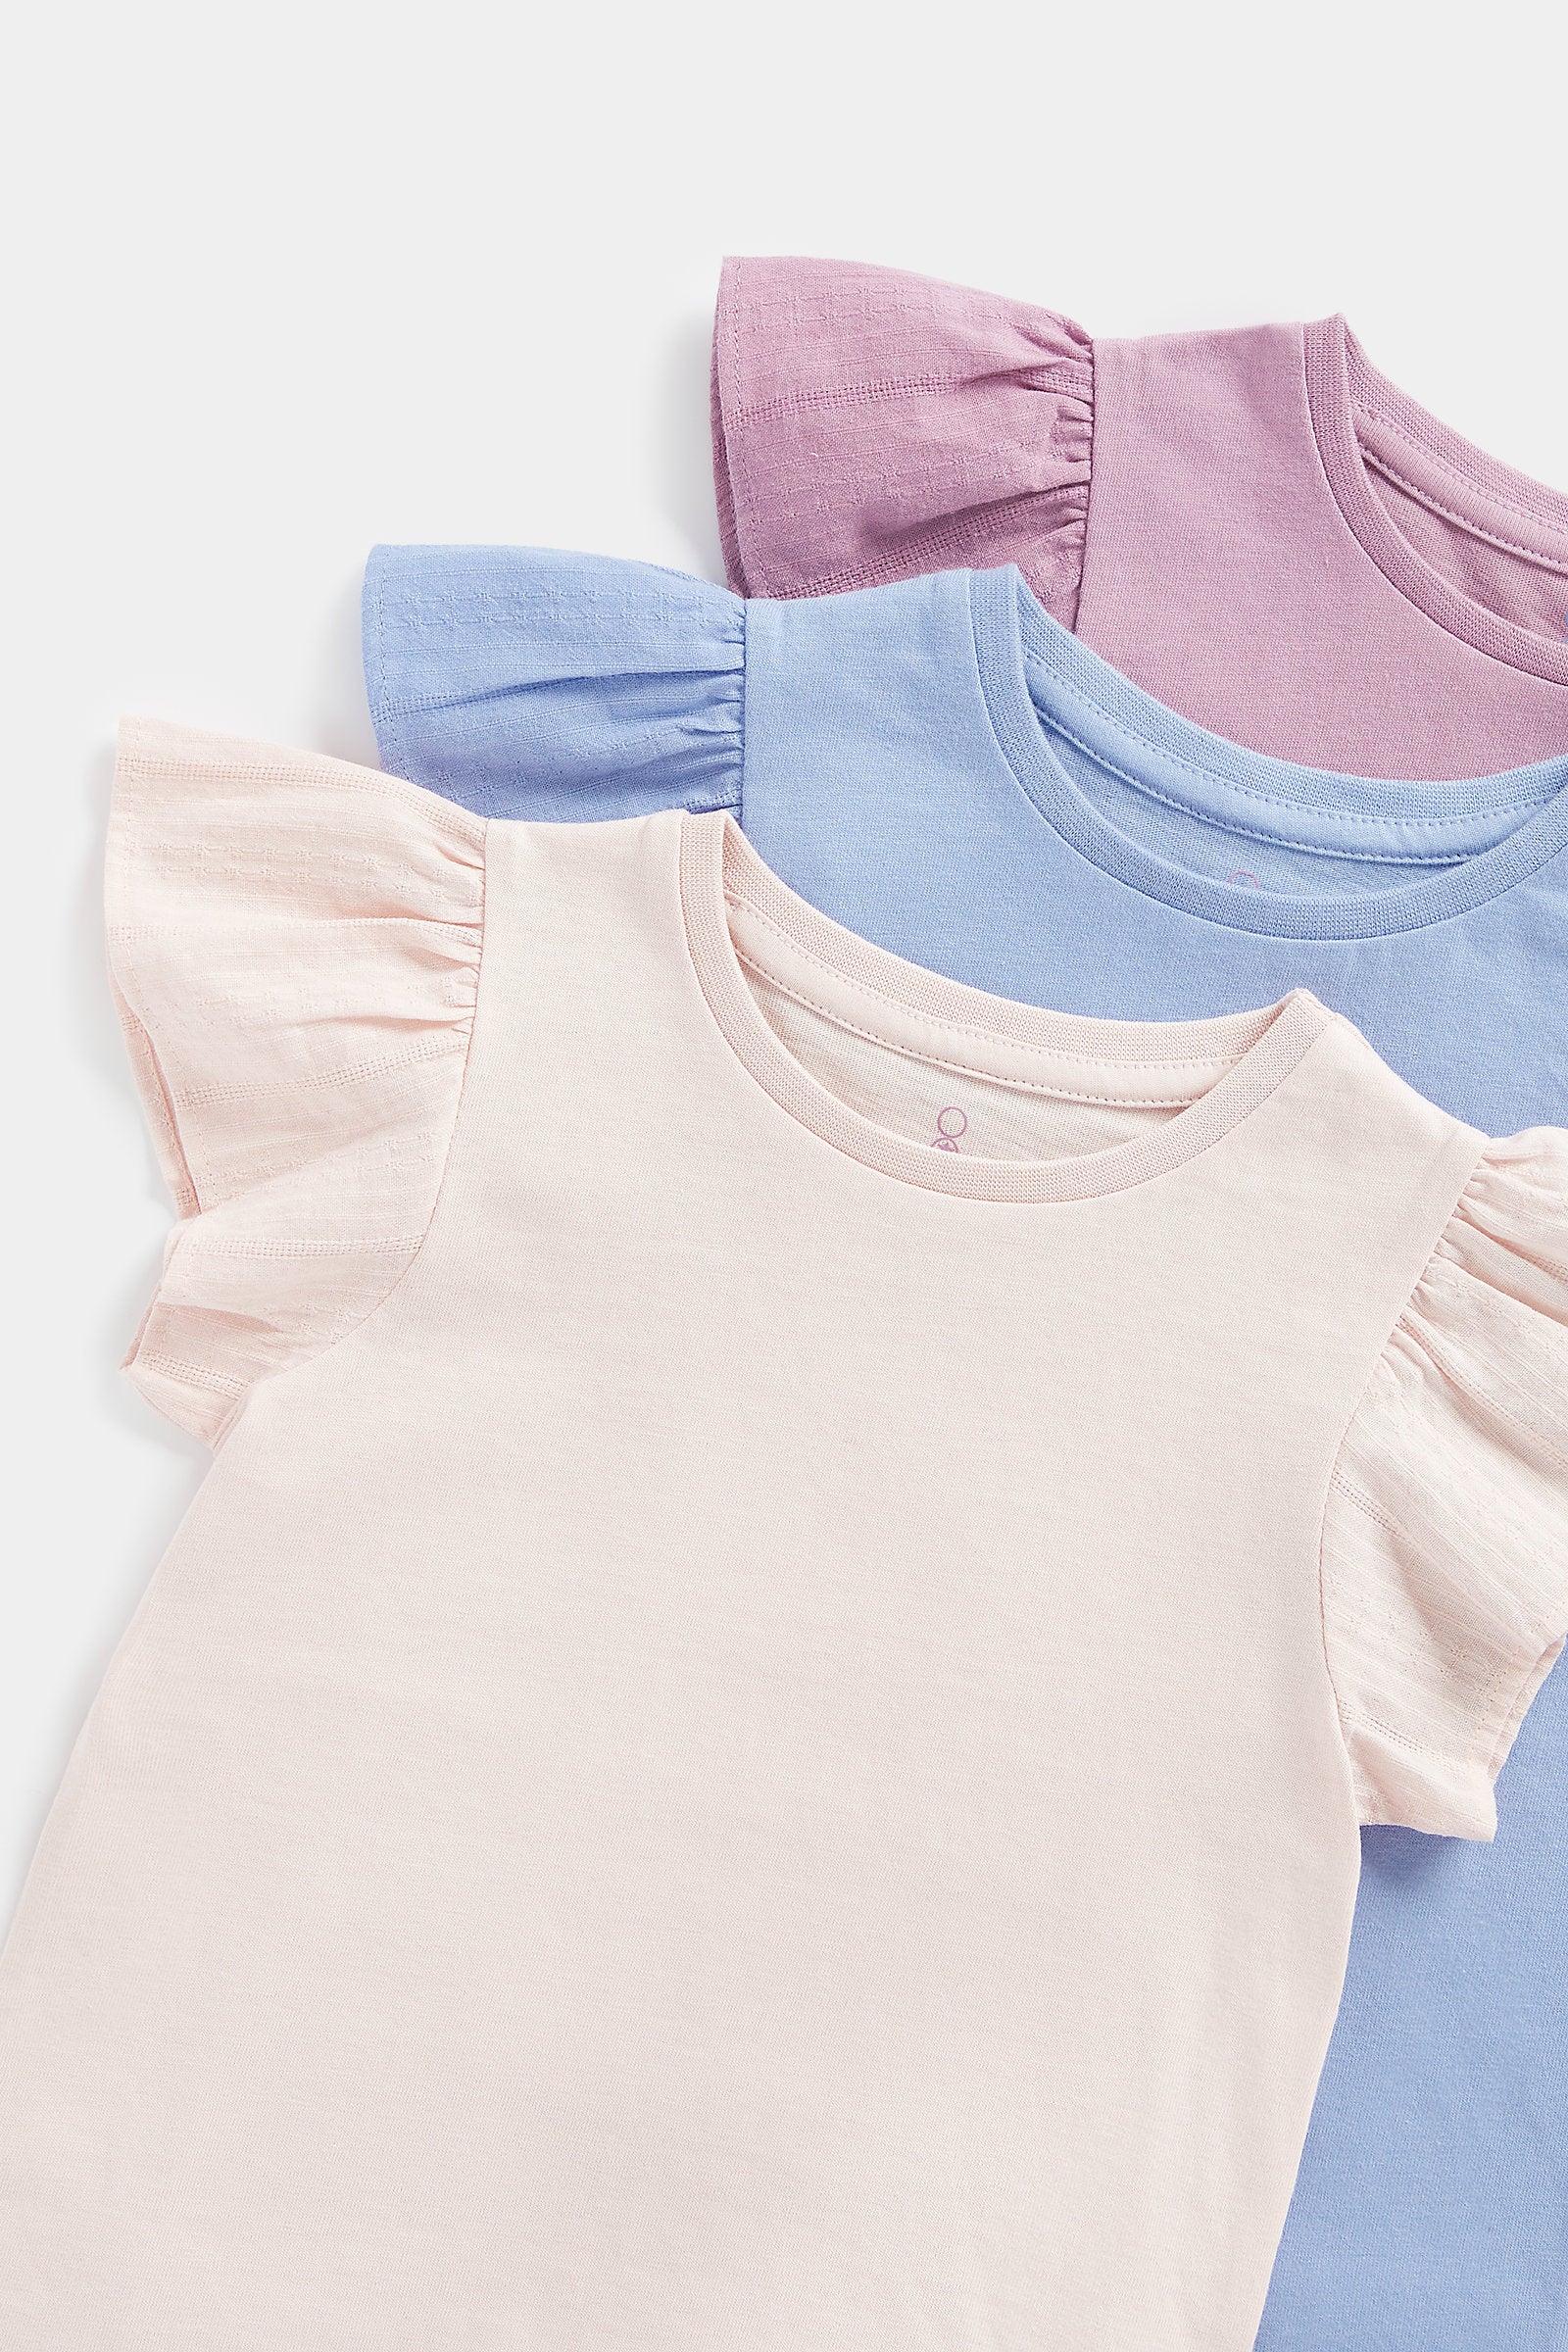 Mothercare Pink and Blue T-Shirts - 3 Pack